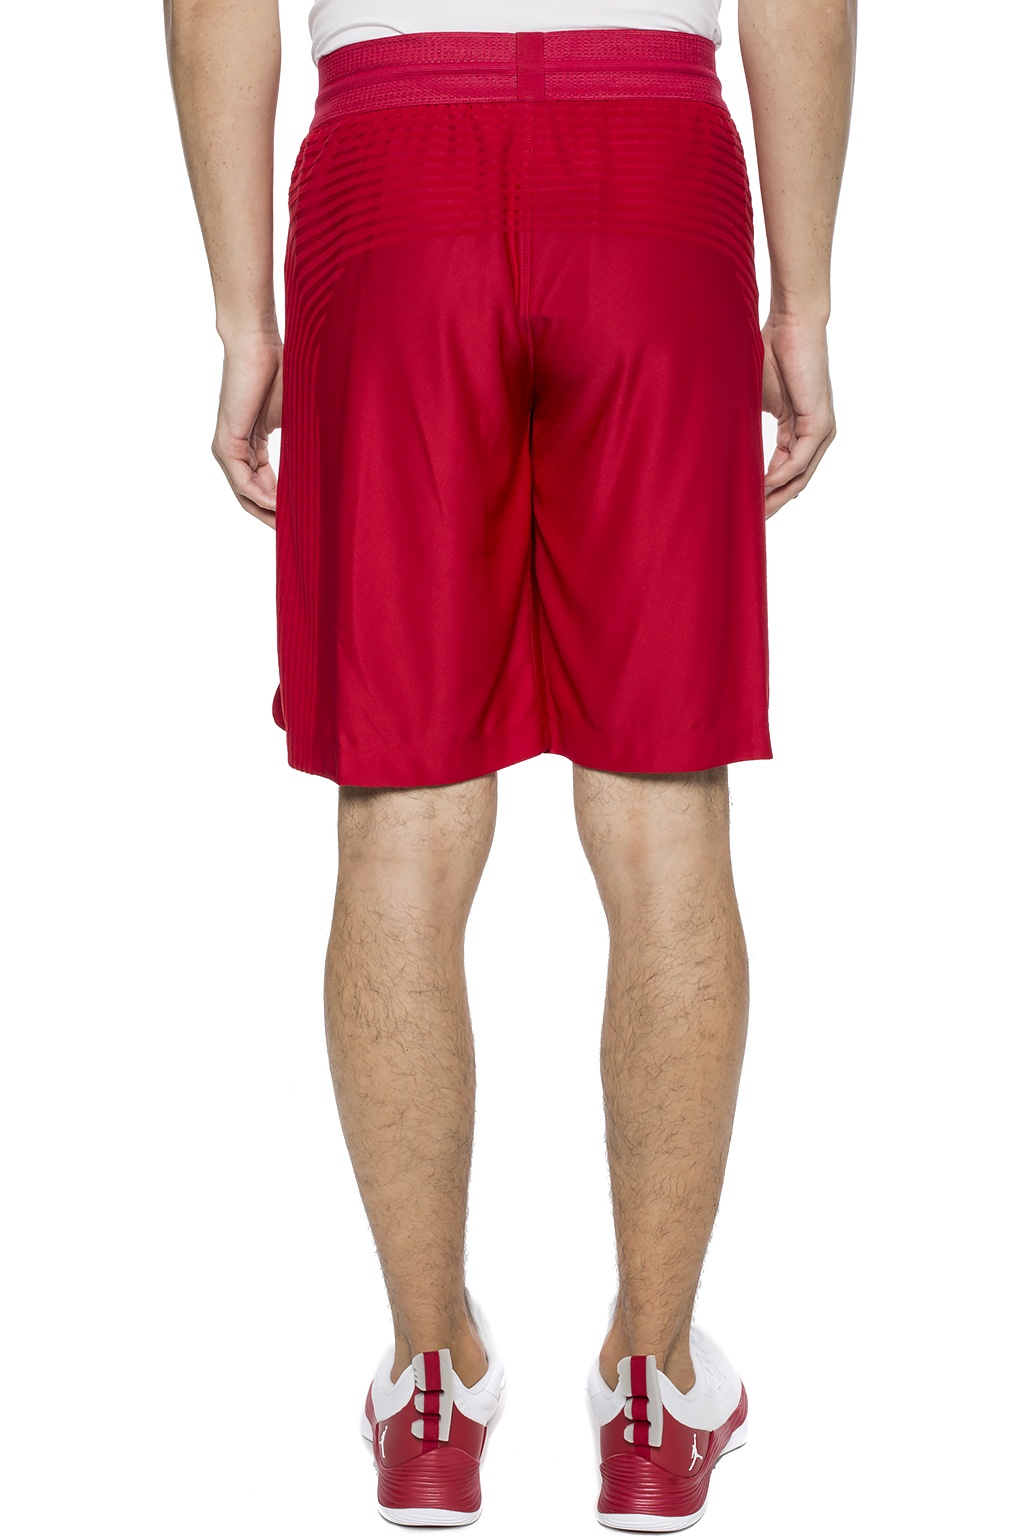 red and white nike shorts